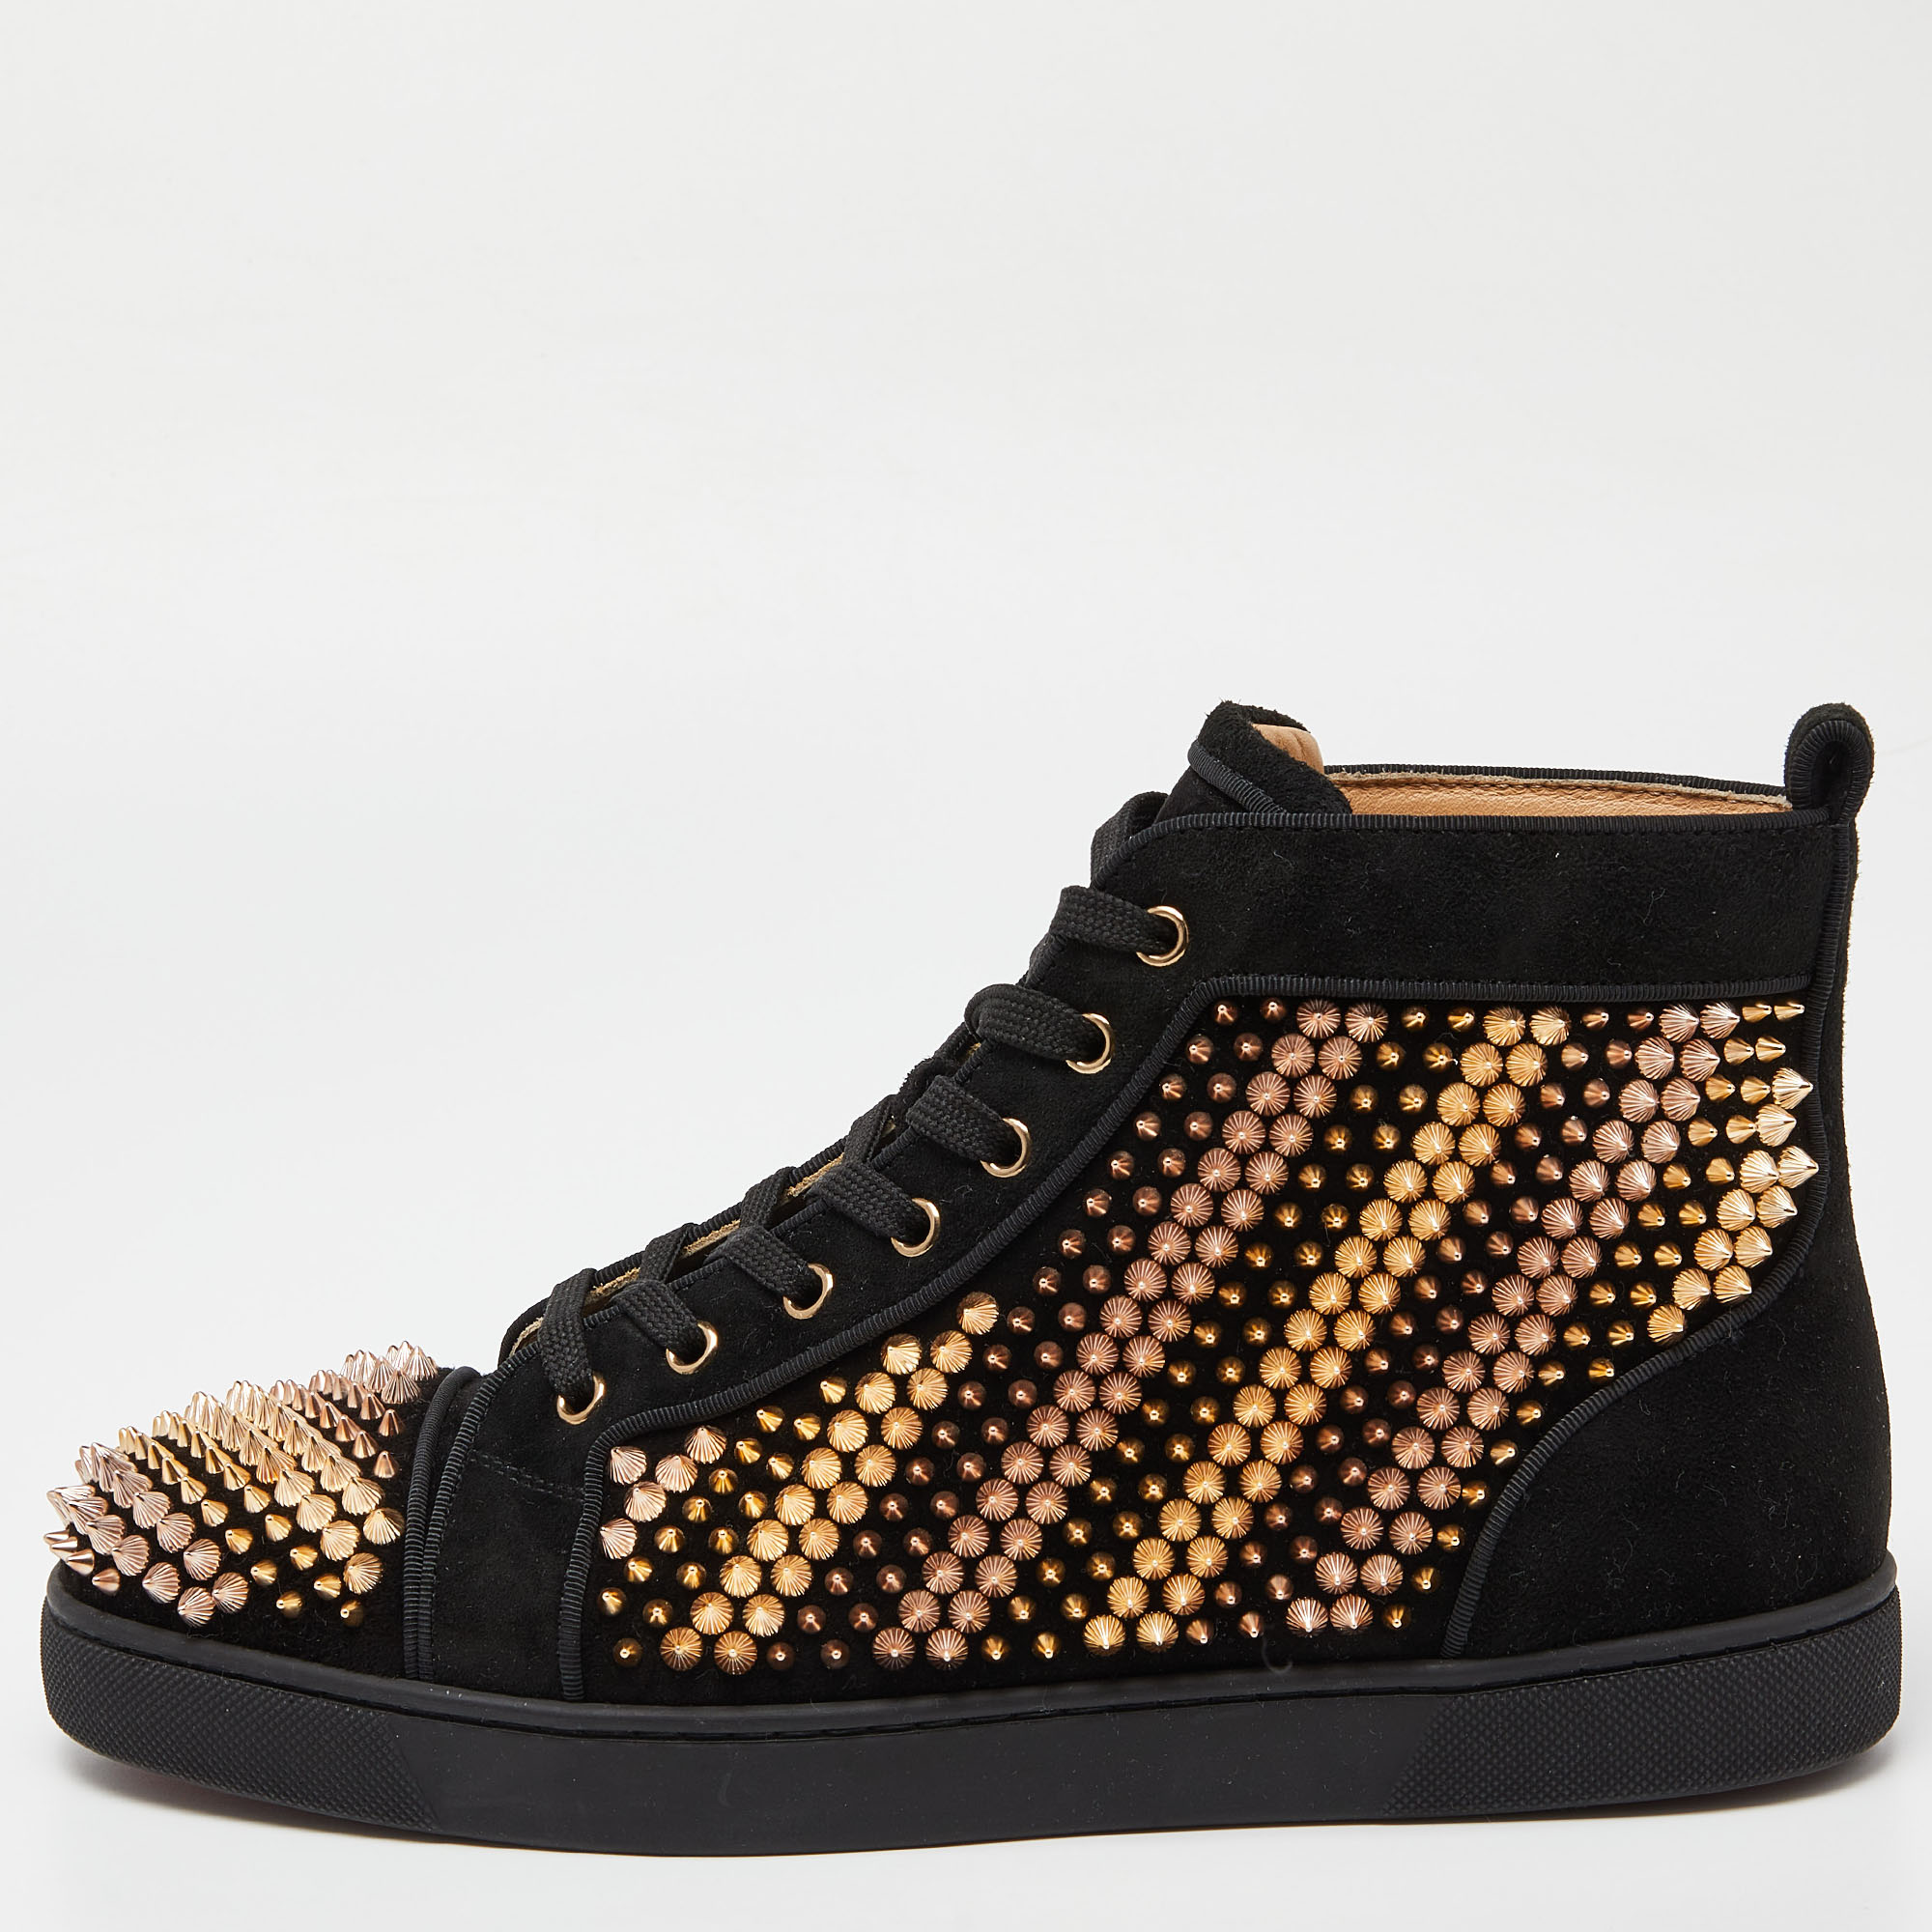 Christian Louboutin Black Suede Louis Spike Sneakers Size 43